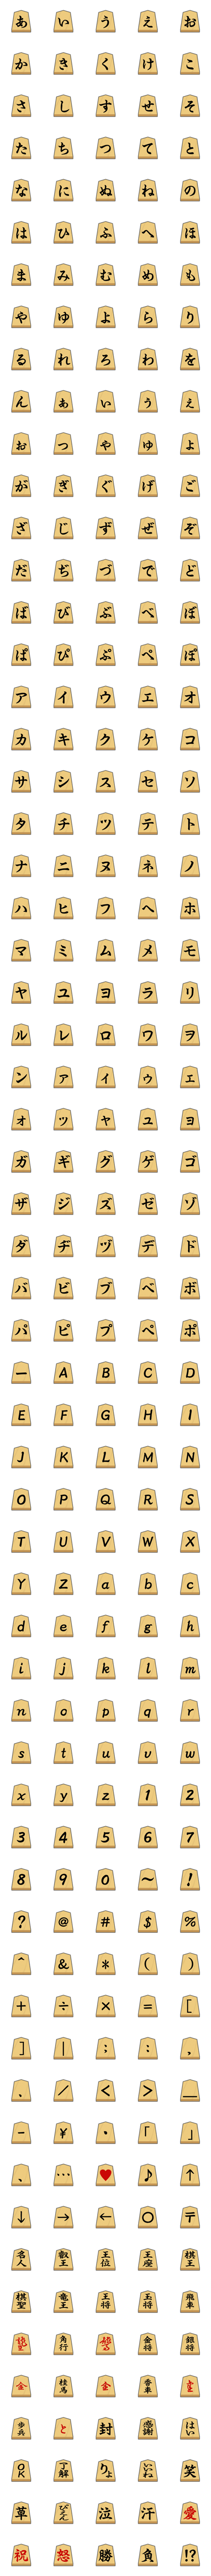 [LINE絵文字]将棋の絵文字【改】の画像一覧